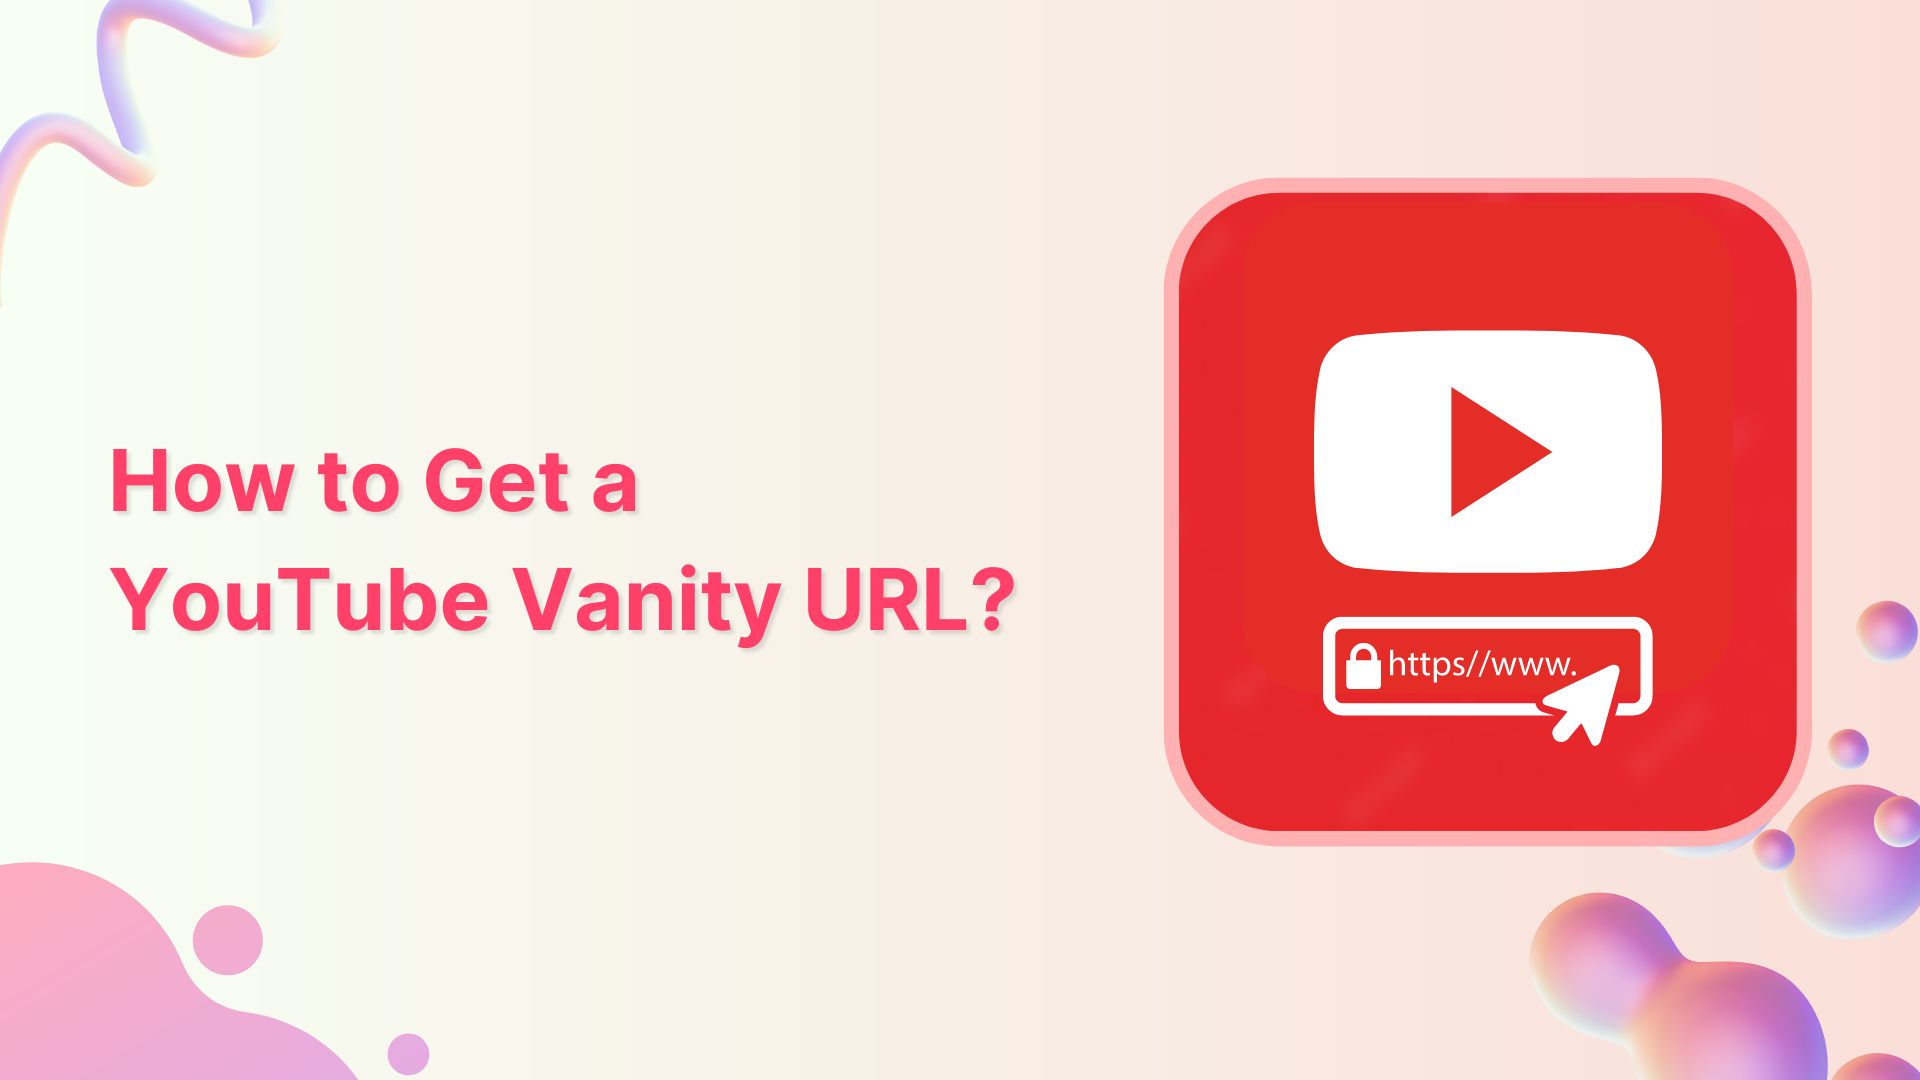 How to Get a YouTube Vanity URL: Quick Guide